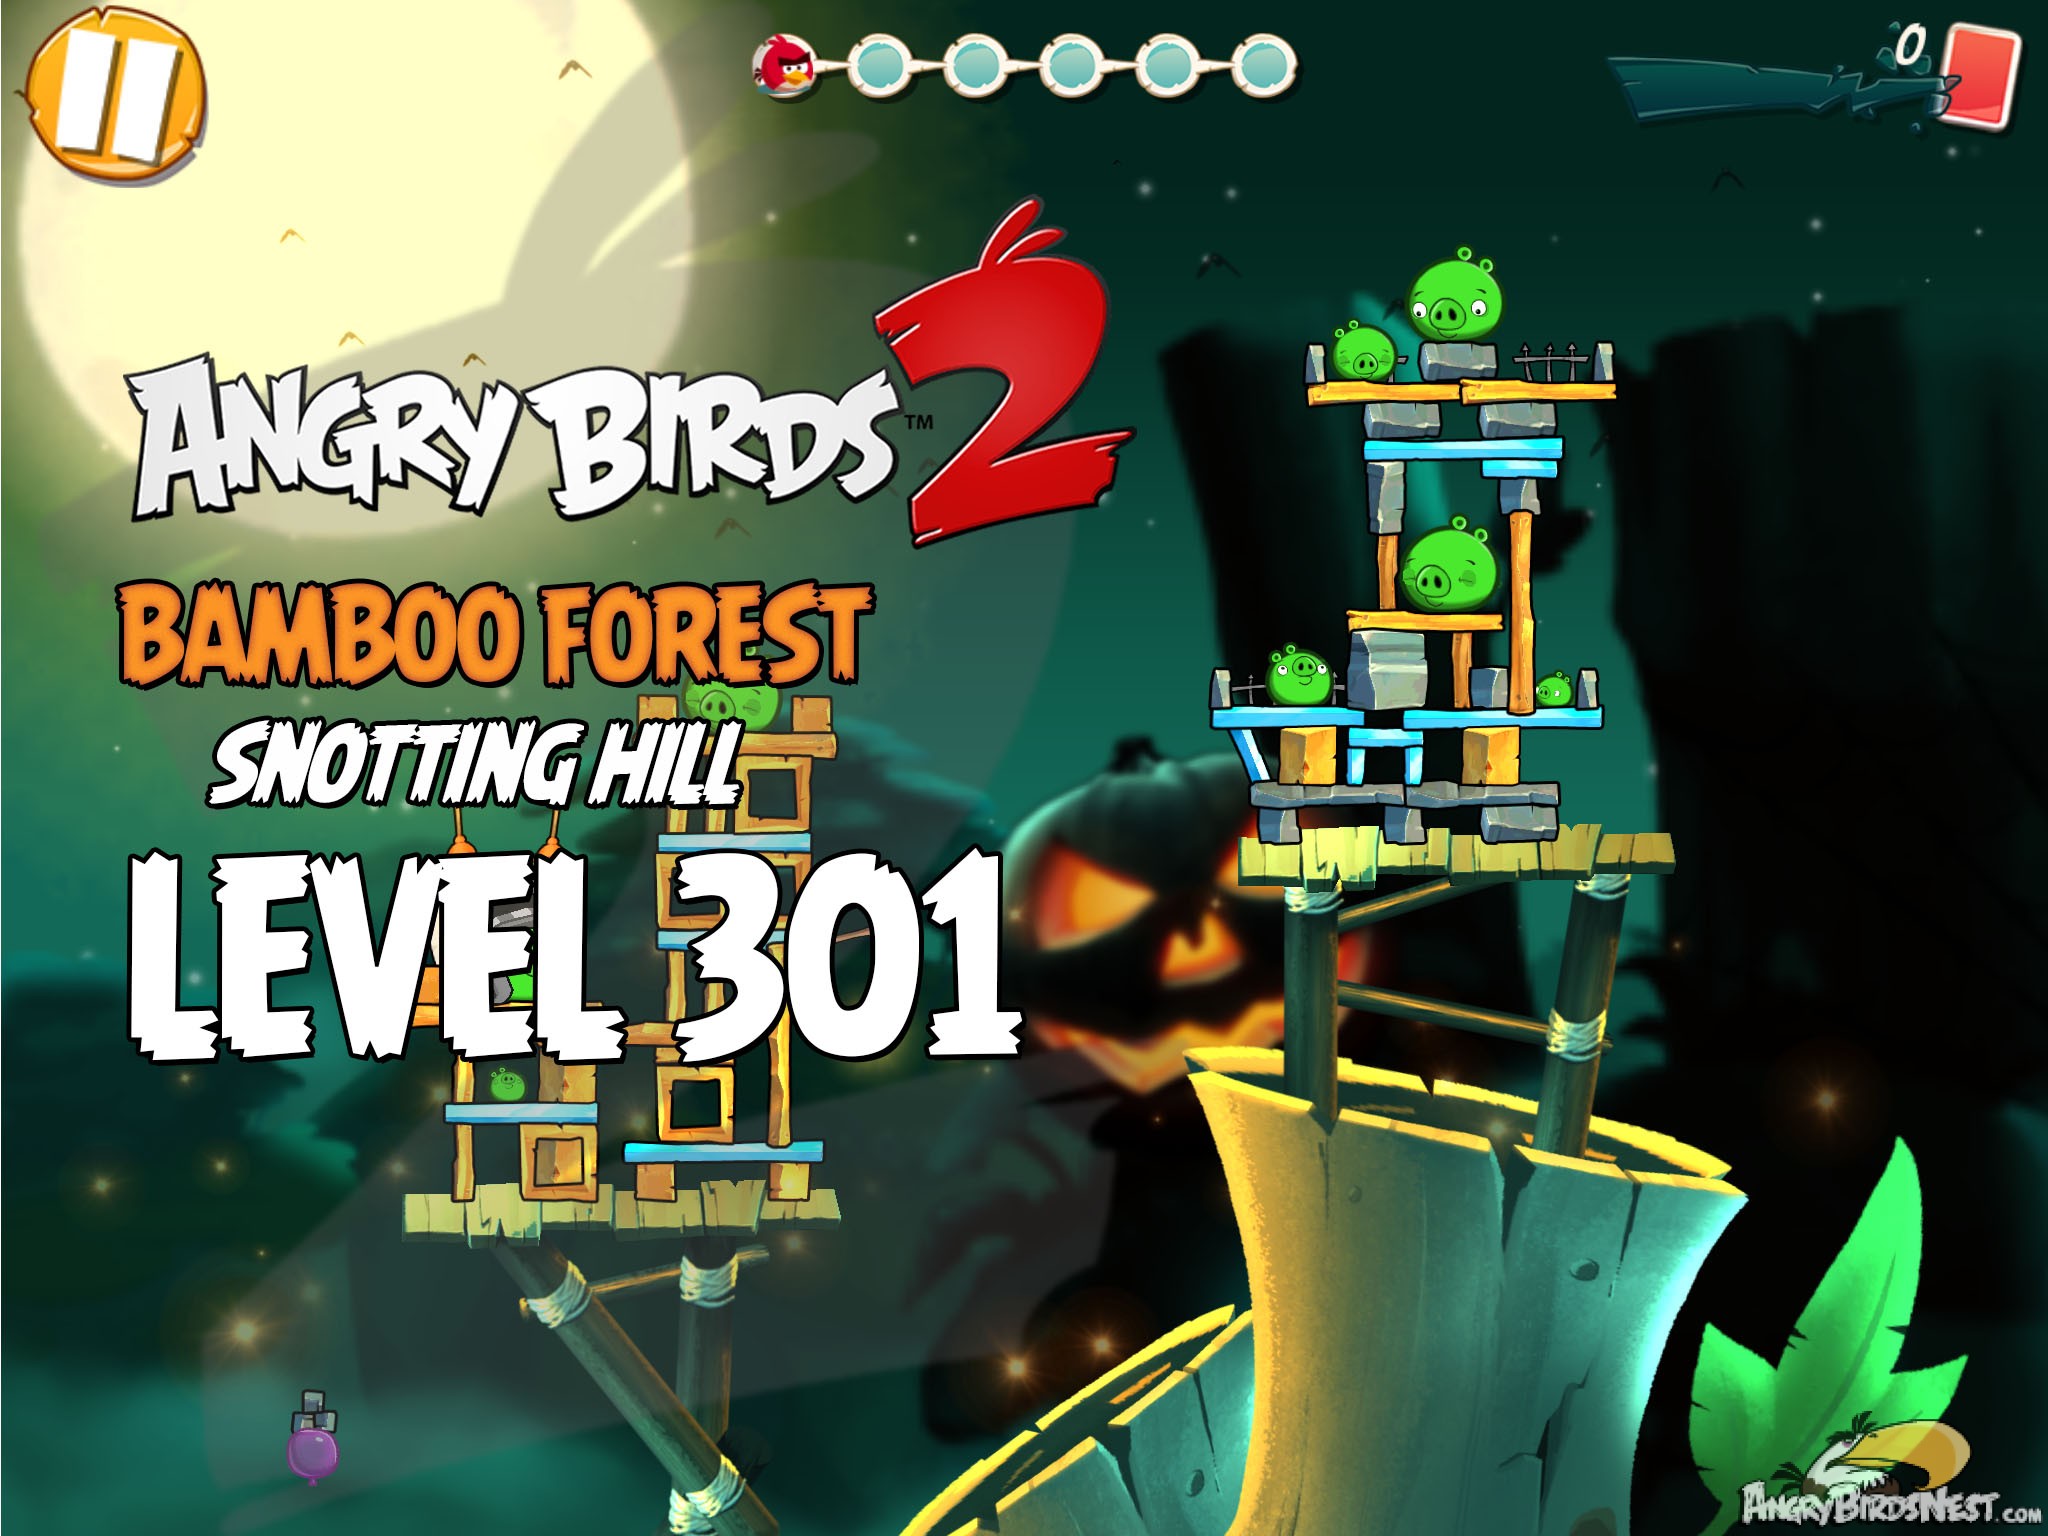 Angry Birds 2 Bamboo Forest Snotting Hill Level 301